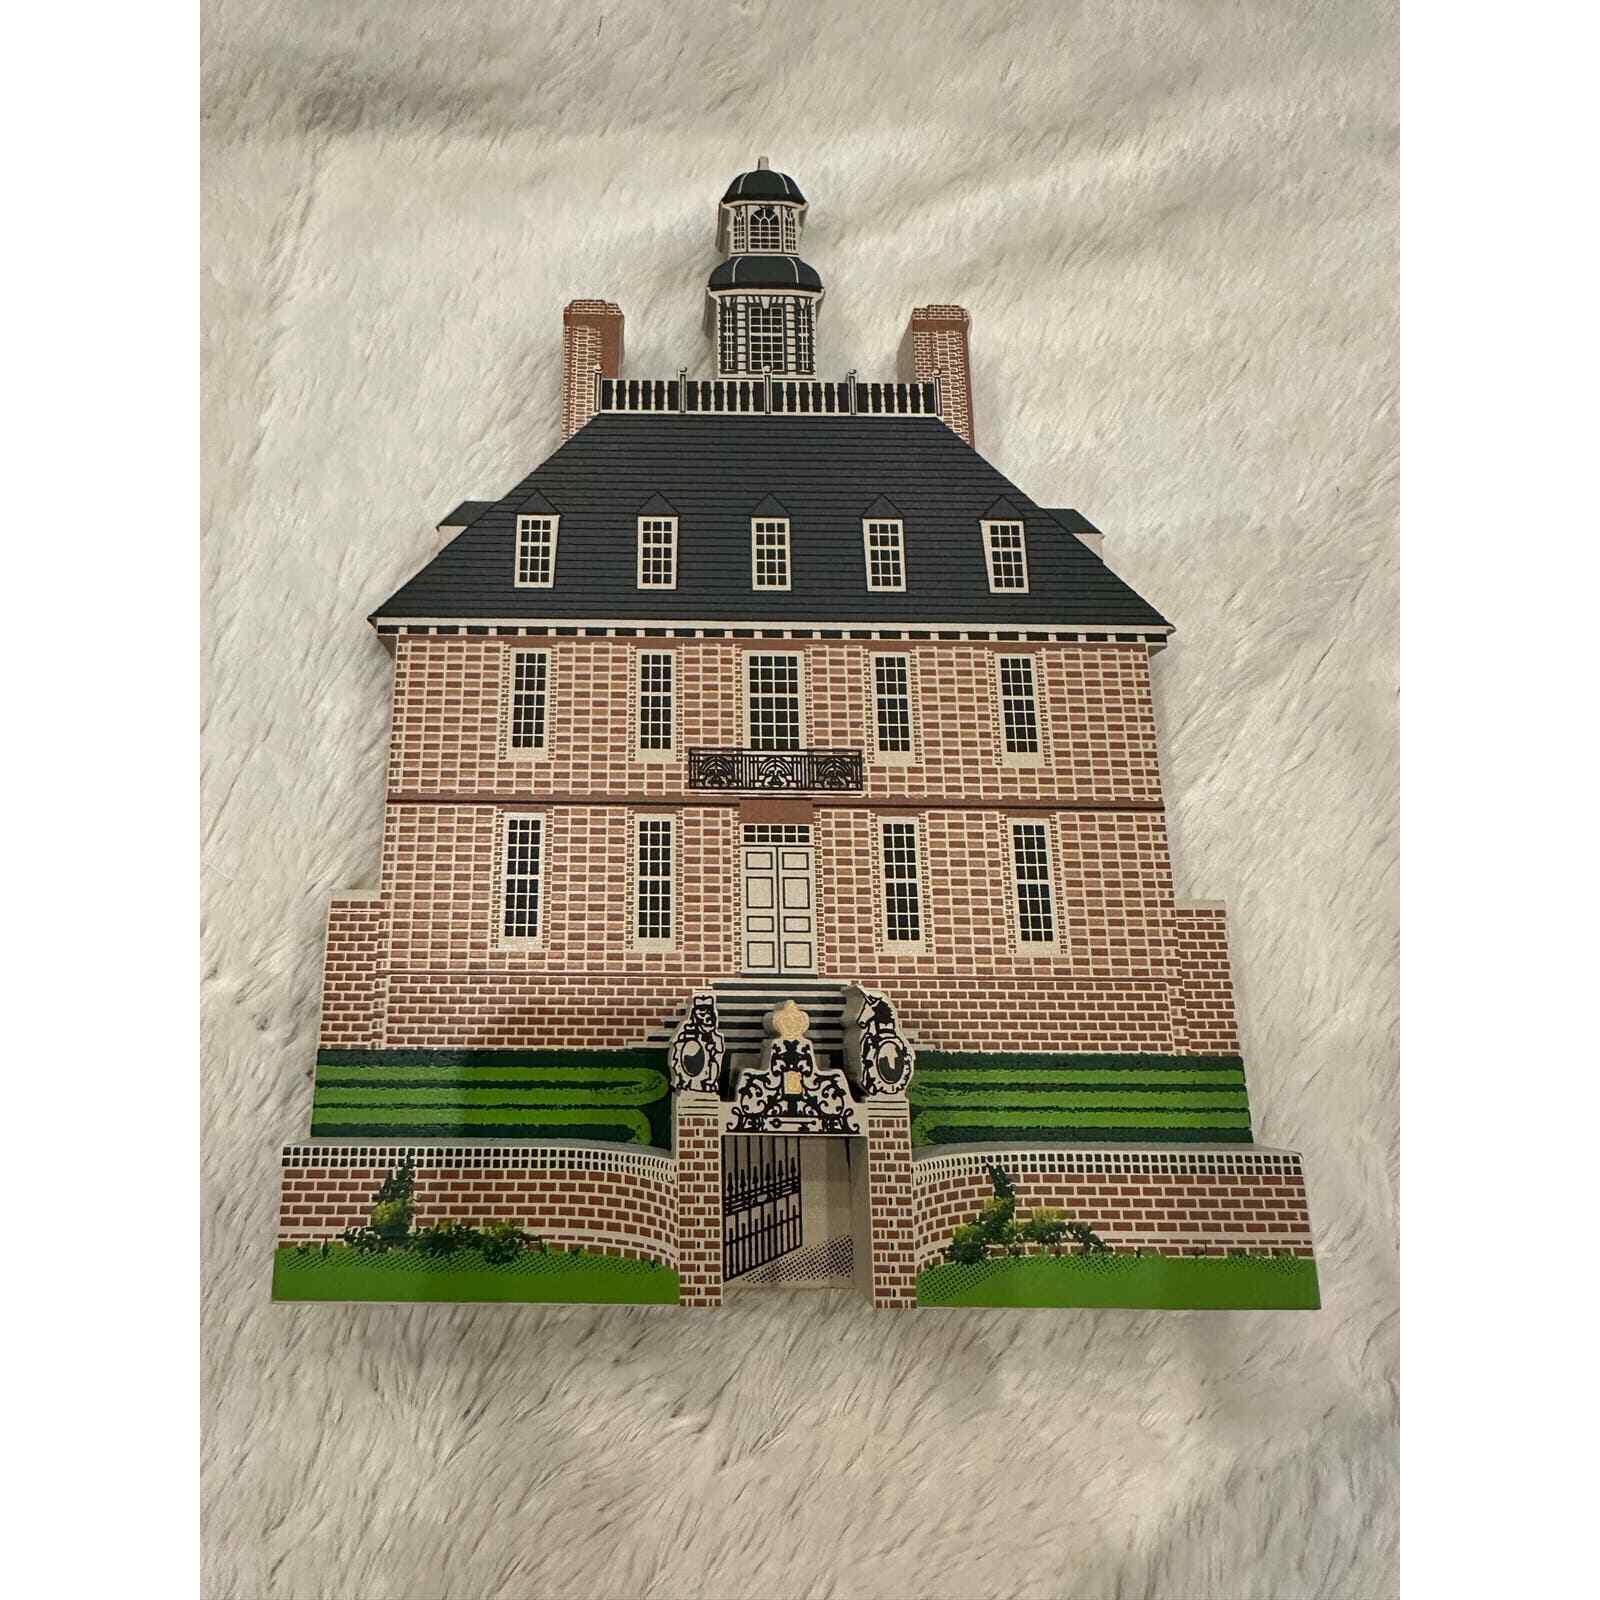 Sheila’s Collectibles:  Governor’s Palace (Williamsburg, VA)